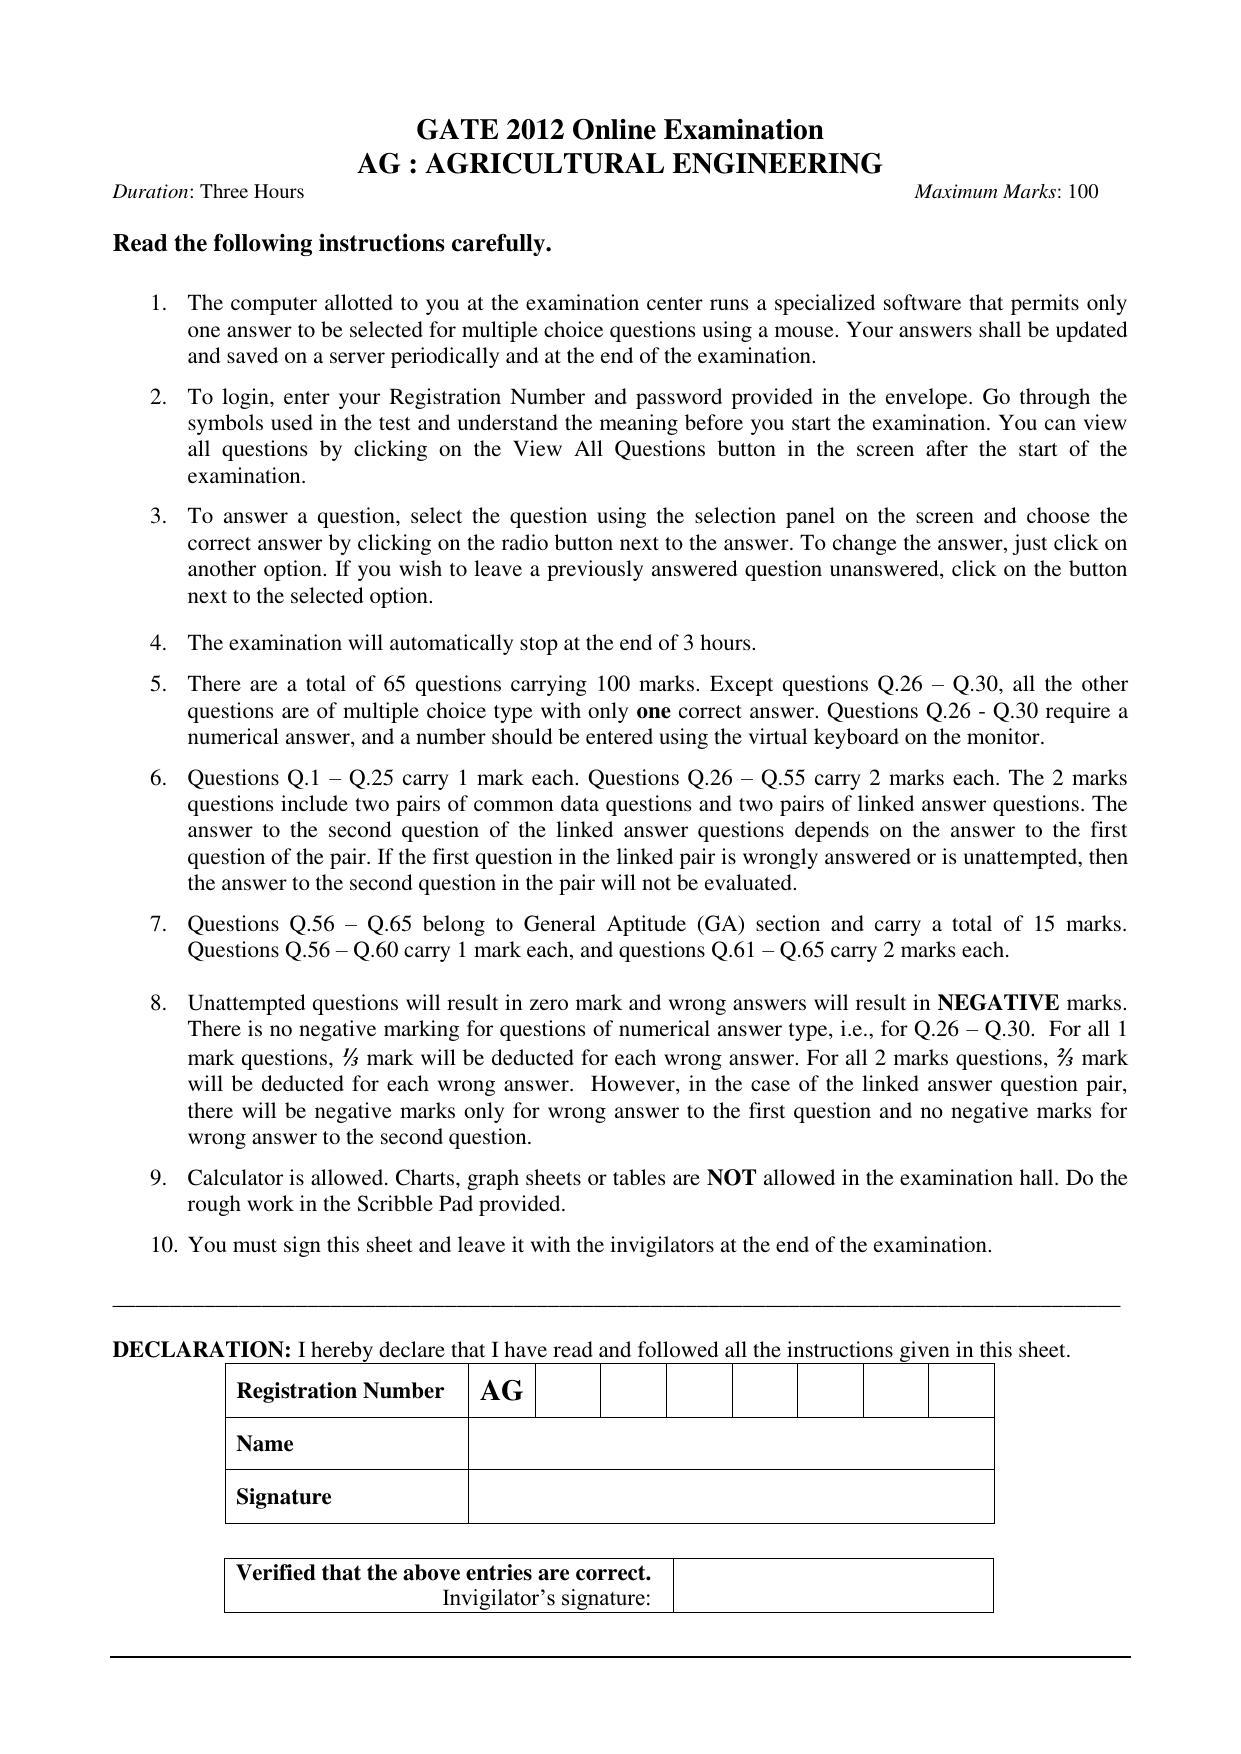 GATE 2012 Agricultural Engineering (AG) Question Paper with Answer Key - Page 1